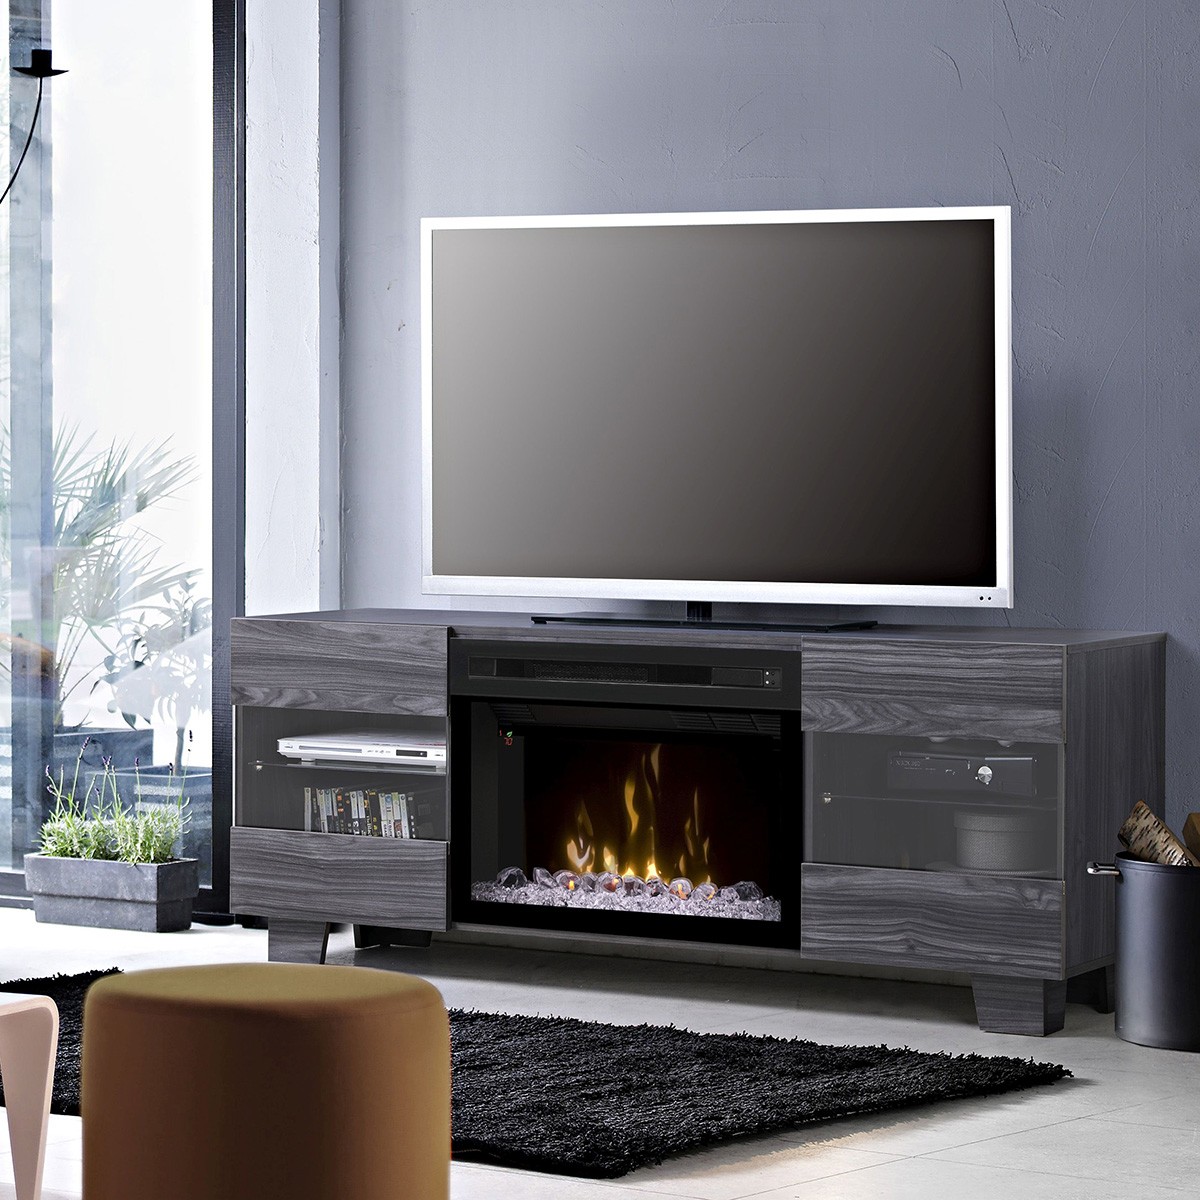 Dimplex Max 62 Electric Fireplace Tv, Dimplex Tv Stand Fireplace